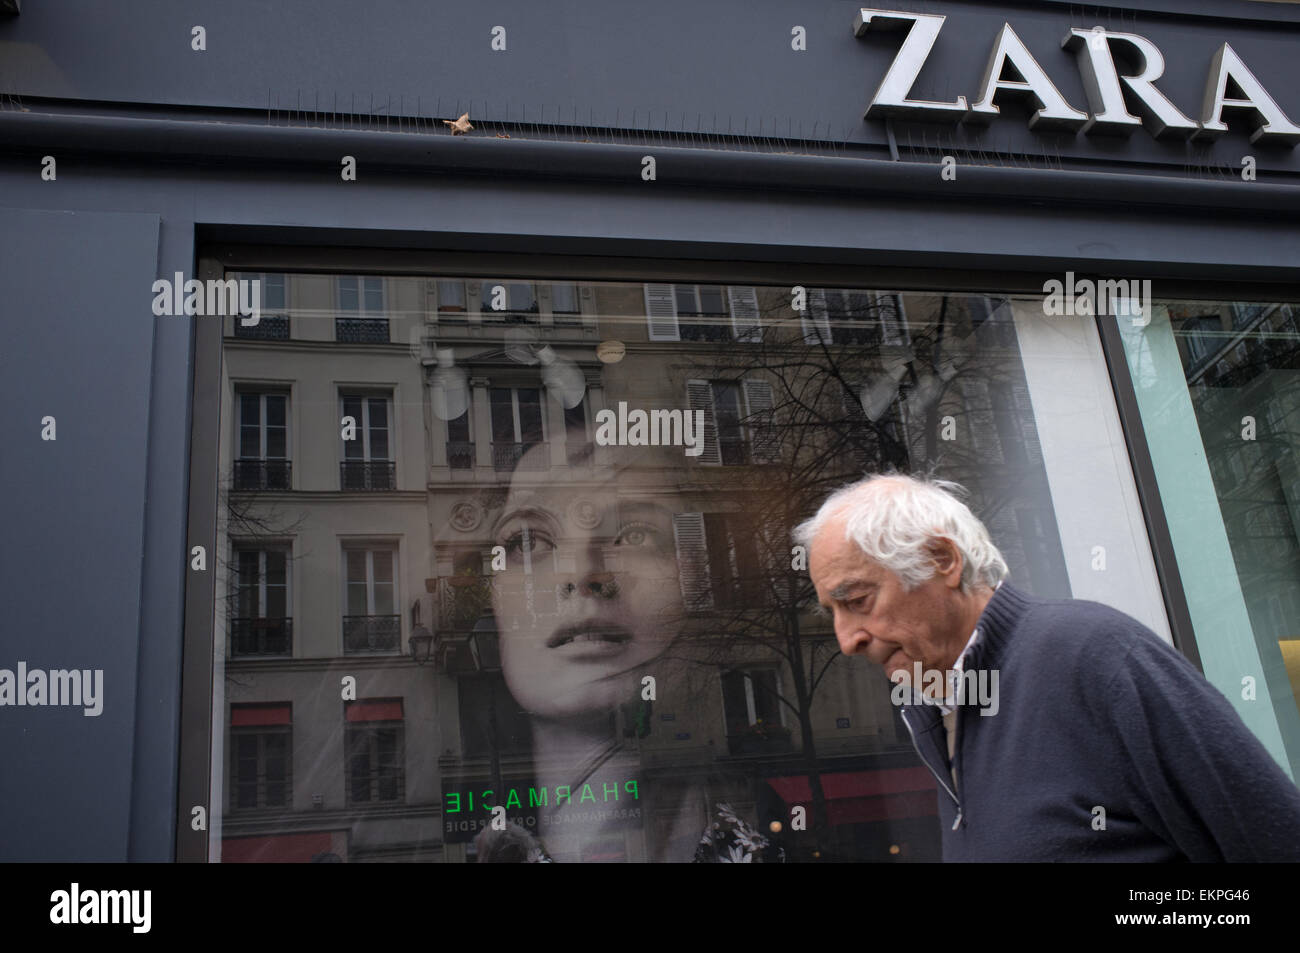 Paris France Zara High Resolution Stock Photography and Images - Alamy